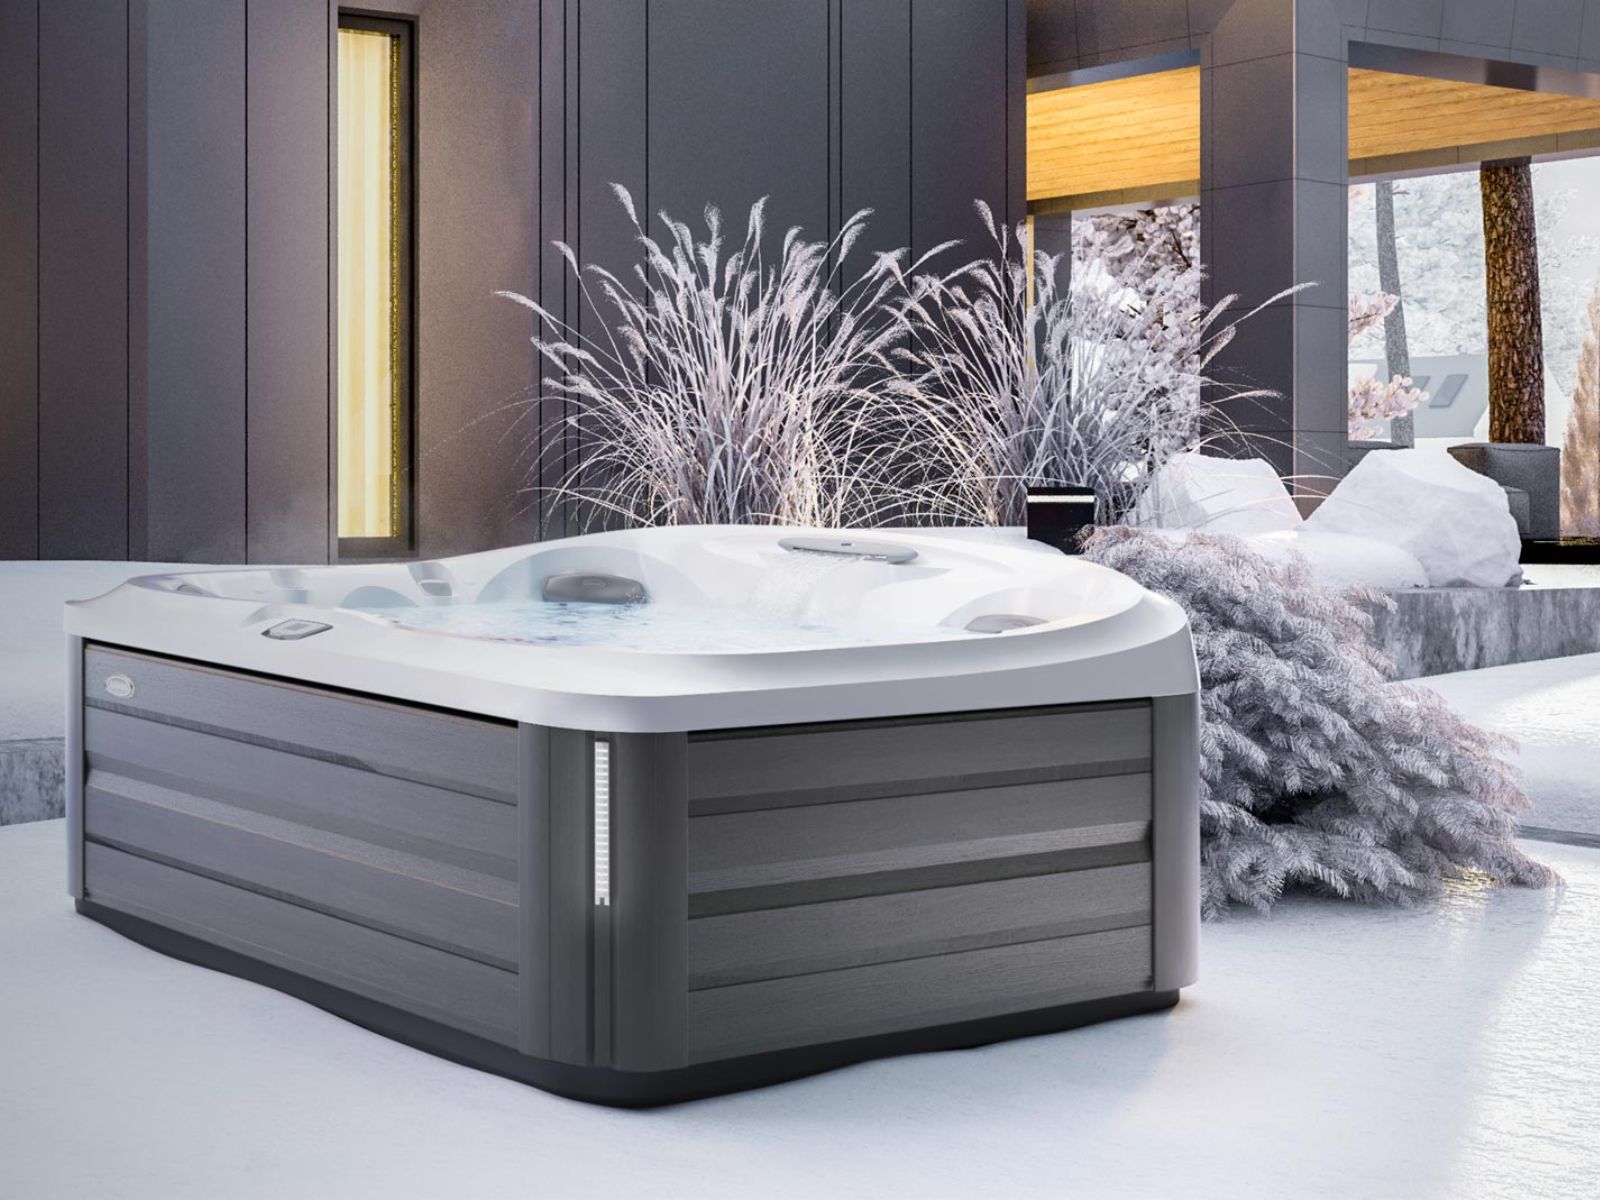 How to look after my hot tub this winter